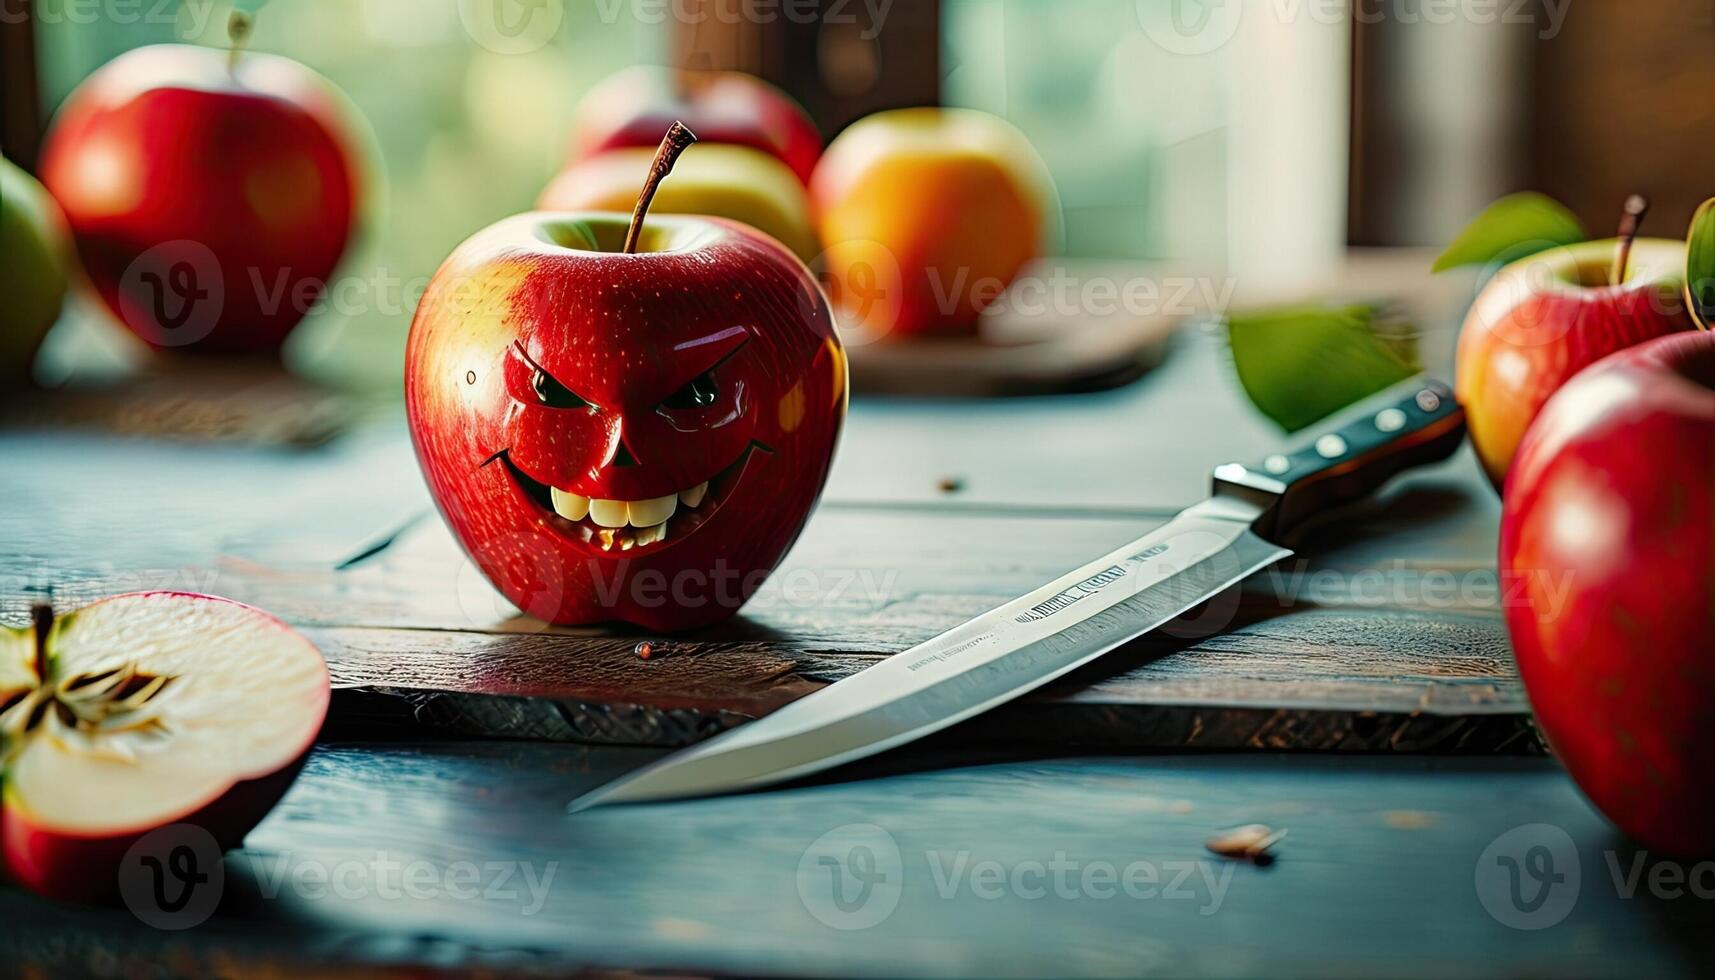 AI Generated Apple evil smiling - carved evil smile on apple, knife rests nearby on wooden surface, indoor lighting. photo